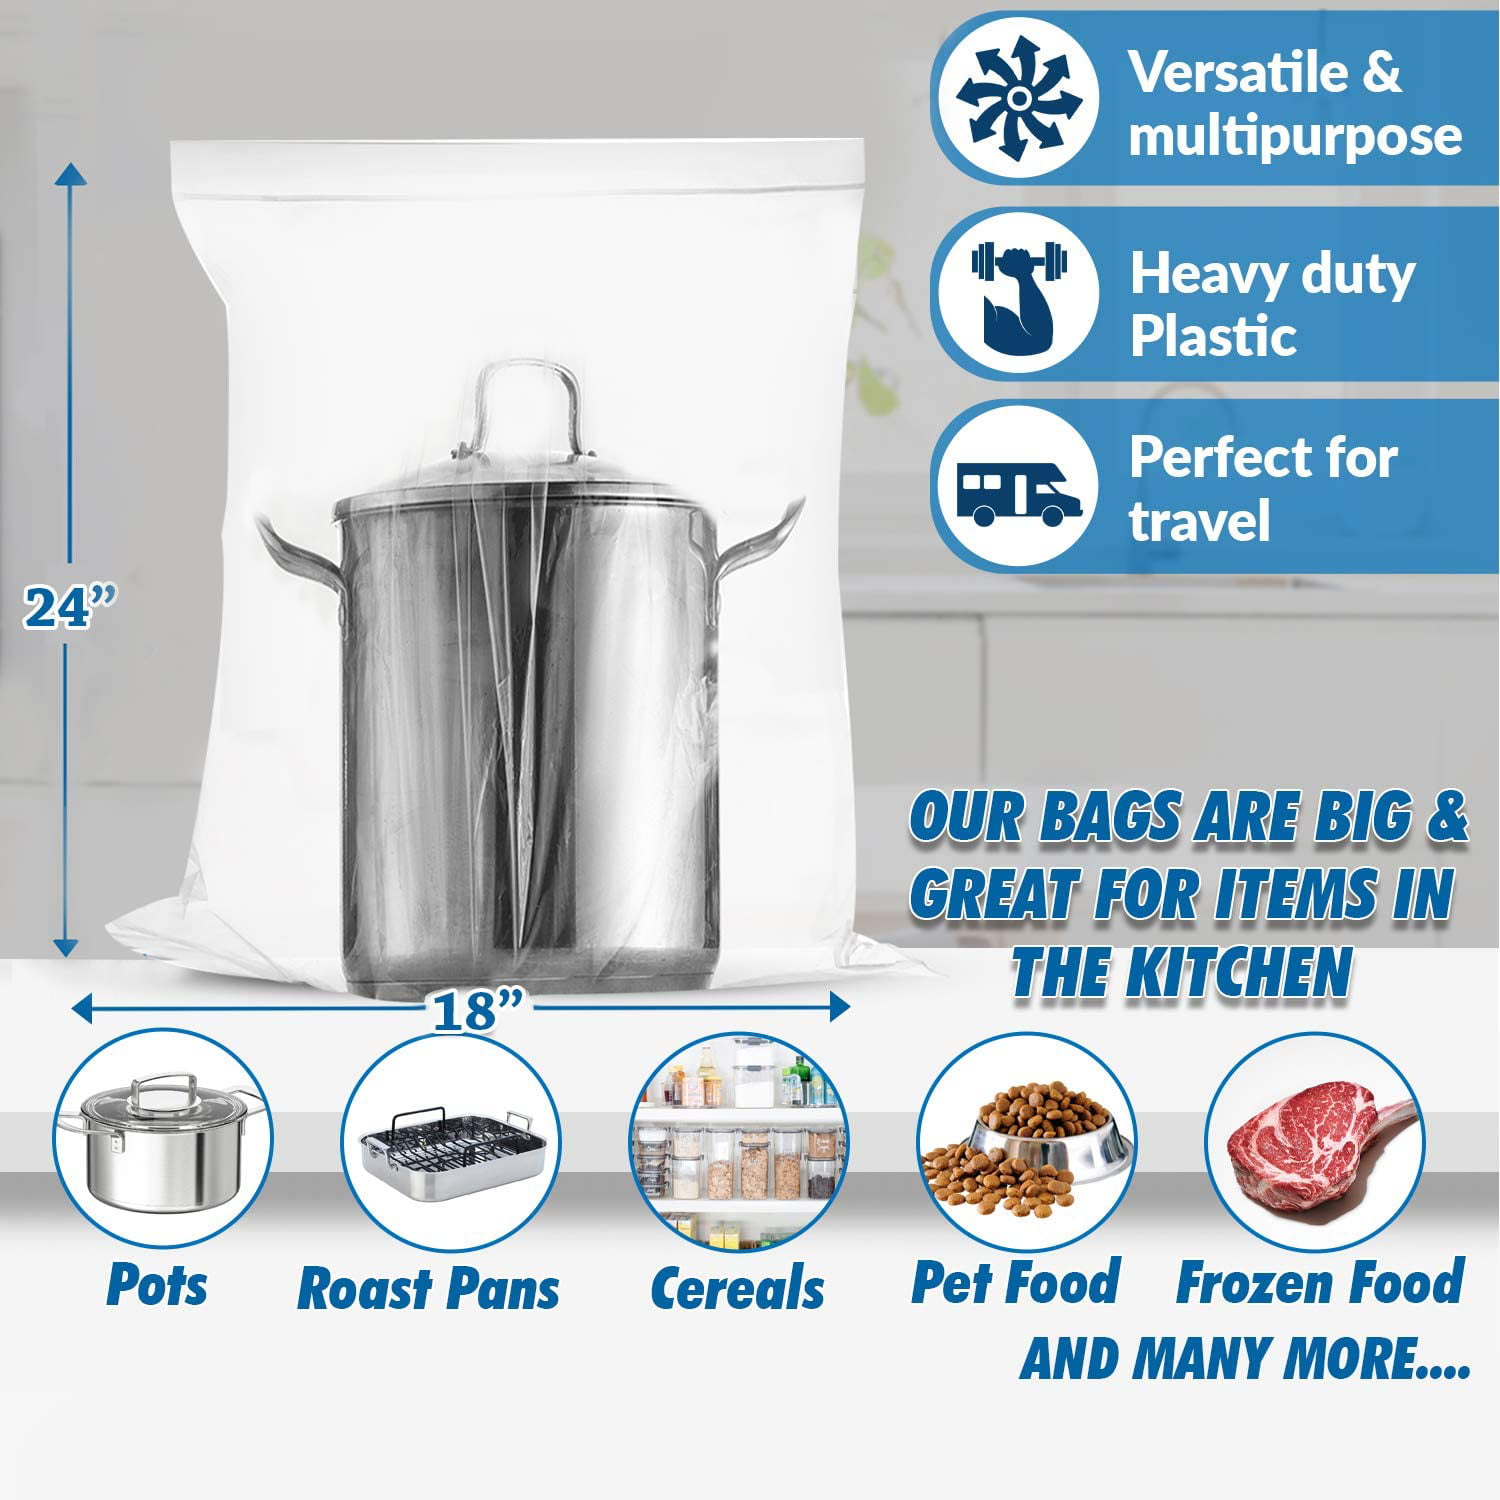  [ 12 COUNT ] Extra Large 5 GALLON Heavy Duty THICK 3 MILL  Plastic Storage Bags With Zipper Top, 18 x 24, Extra Large Food Storage  Bags for Clothes, Travel, Moving